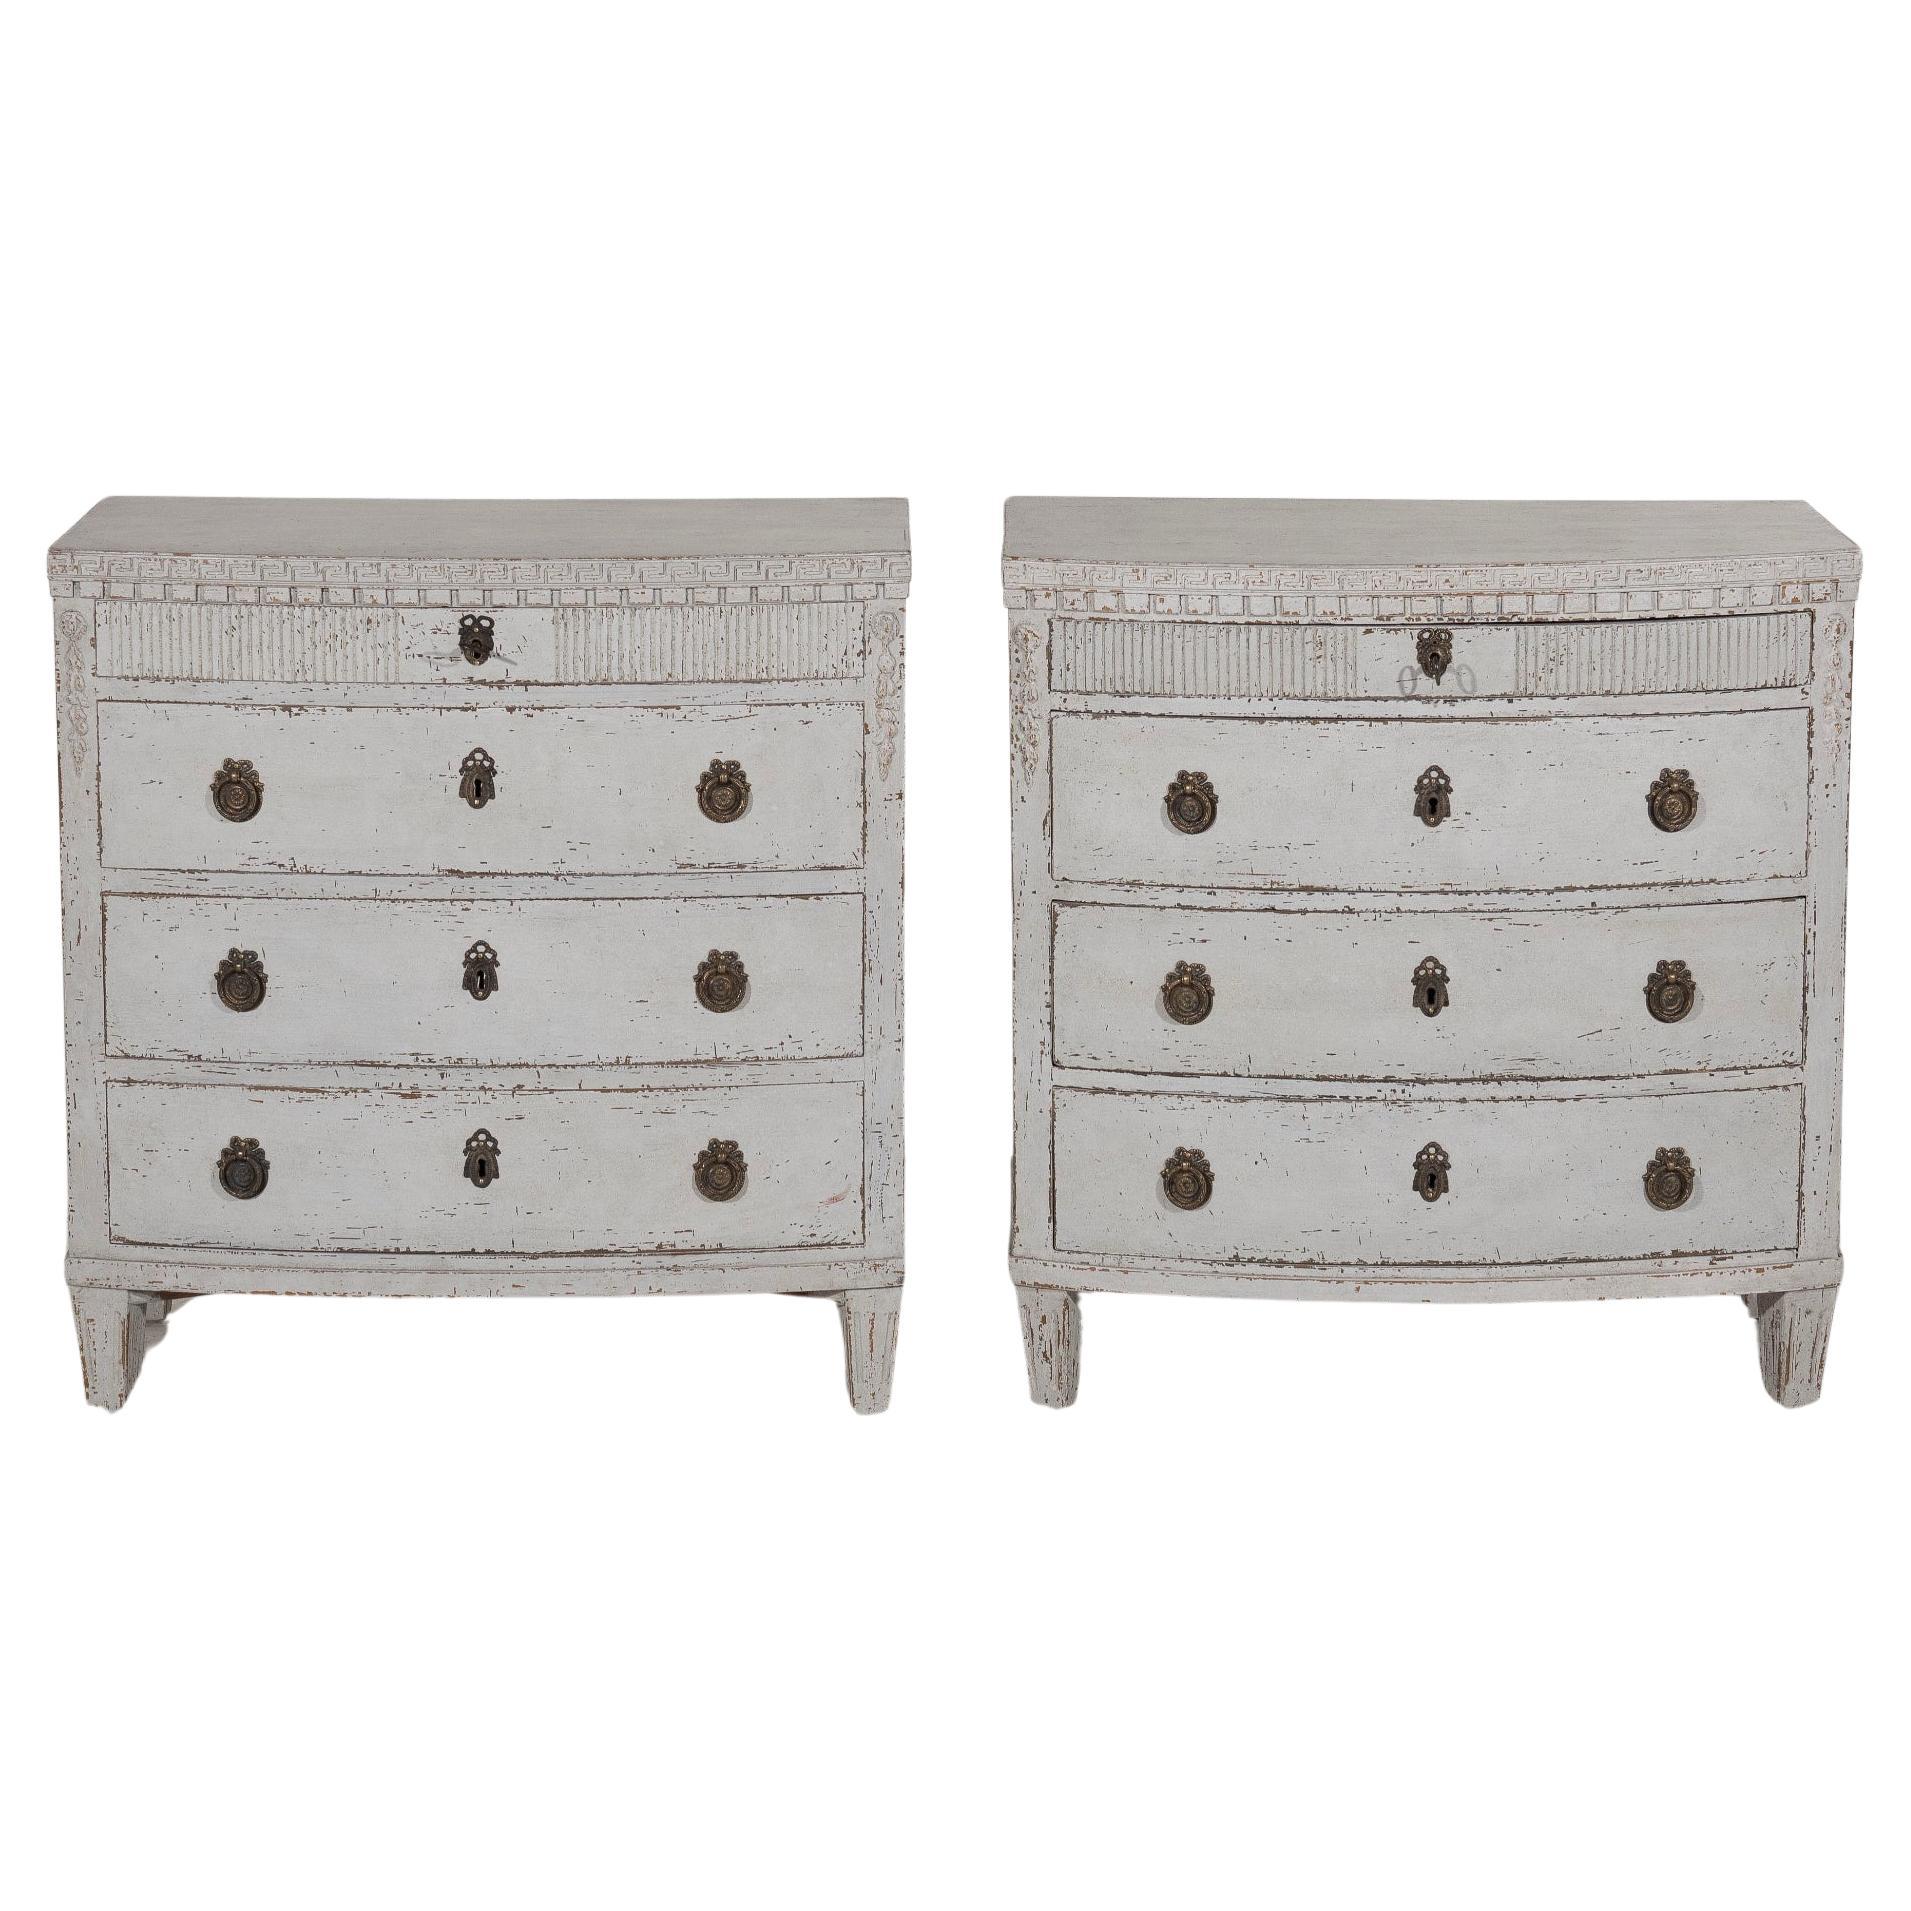 Elegant set of gustavian style chests, circa 100 years old.